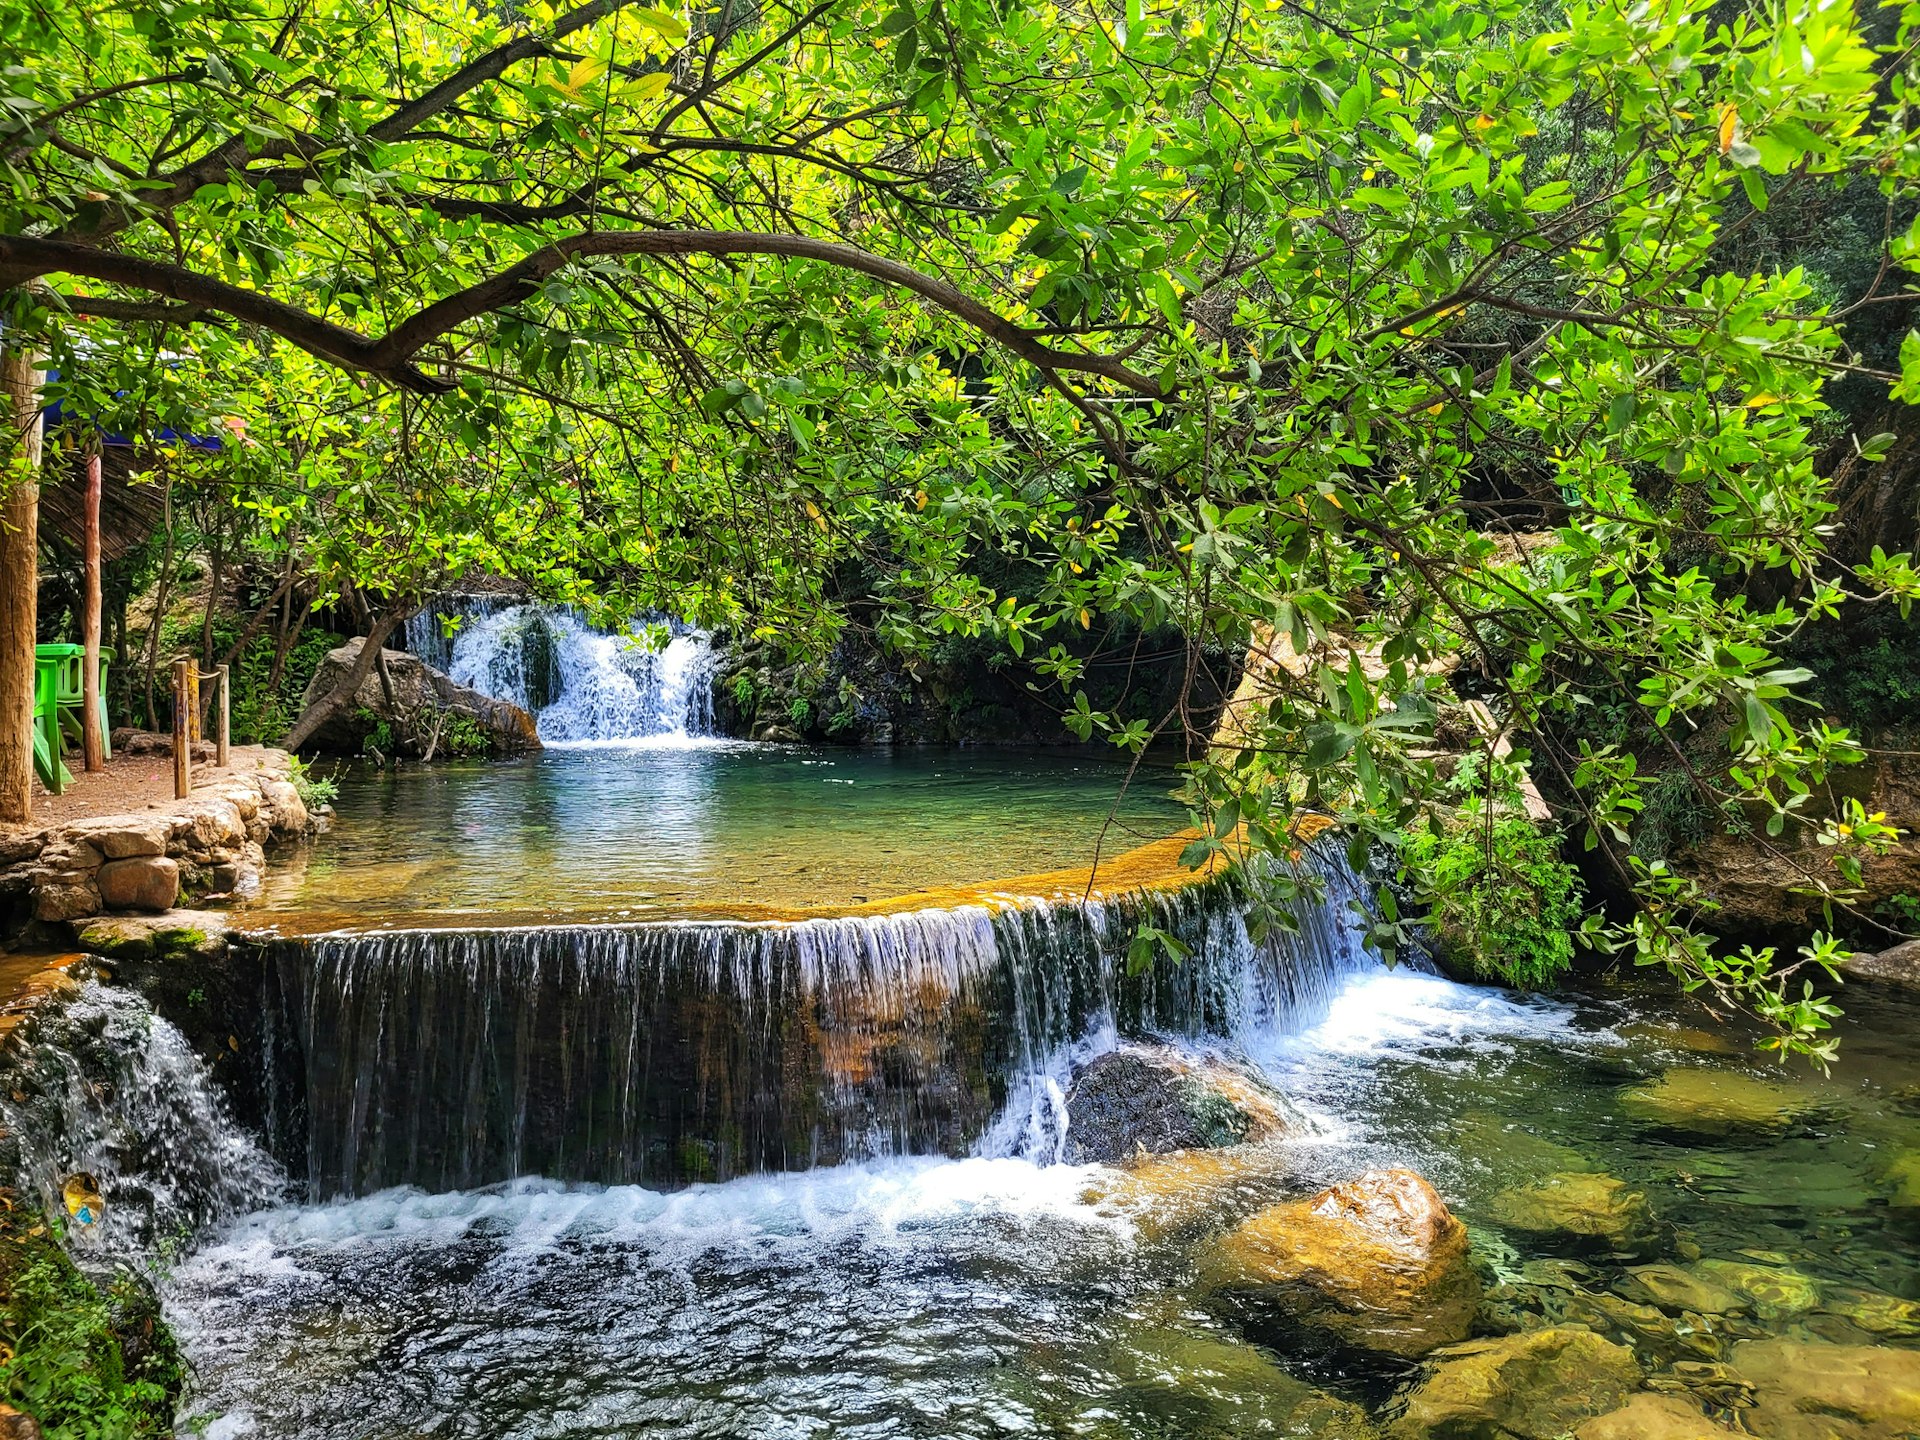 The most popular attraction at Akchour, the 100-metre-high grand cascade, is at the end of a two-hour hike through the Farda River in the Talambote Valley, Rif Mountains